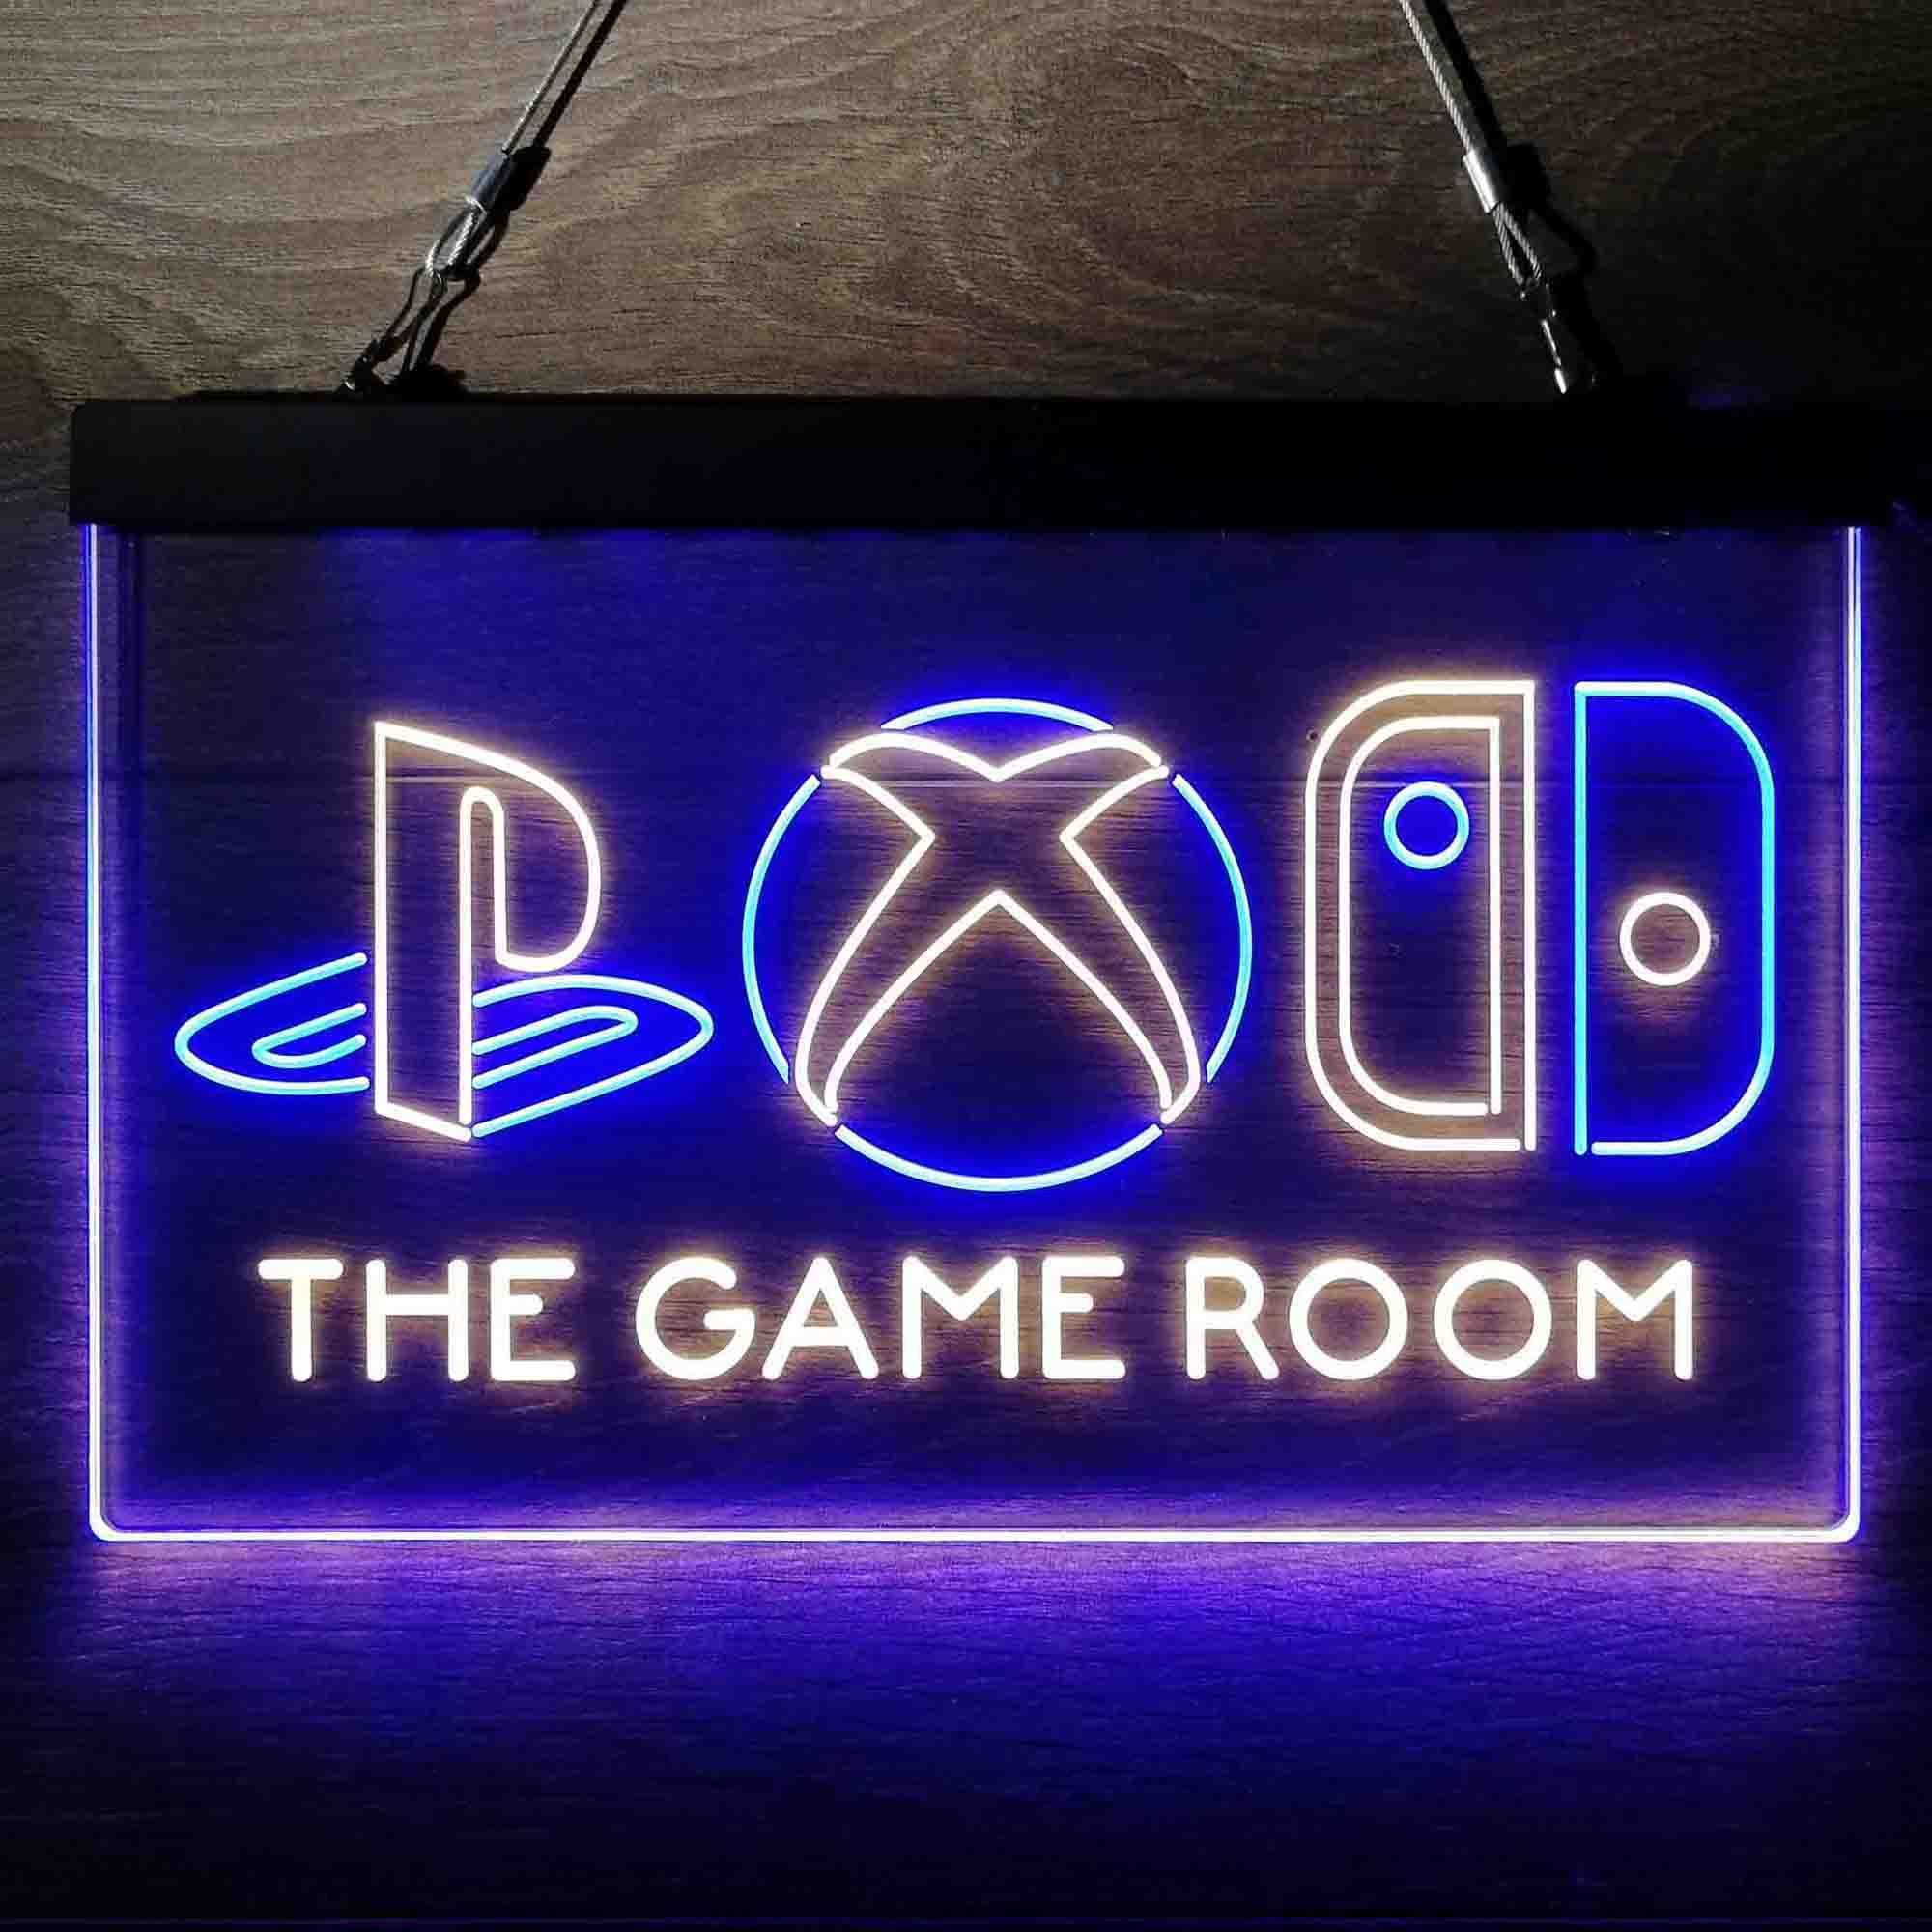 Custom PlayStation Xbox Switch Game Room Neon-Like LED Sign - Birthday Day Gift